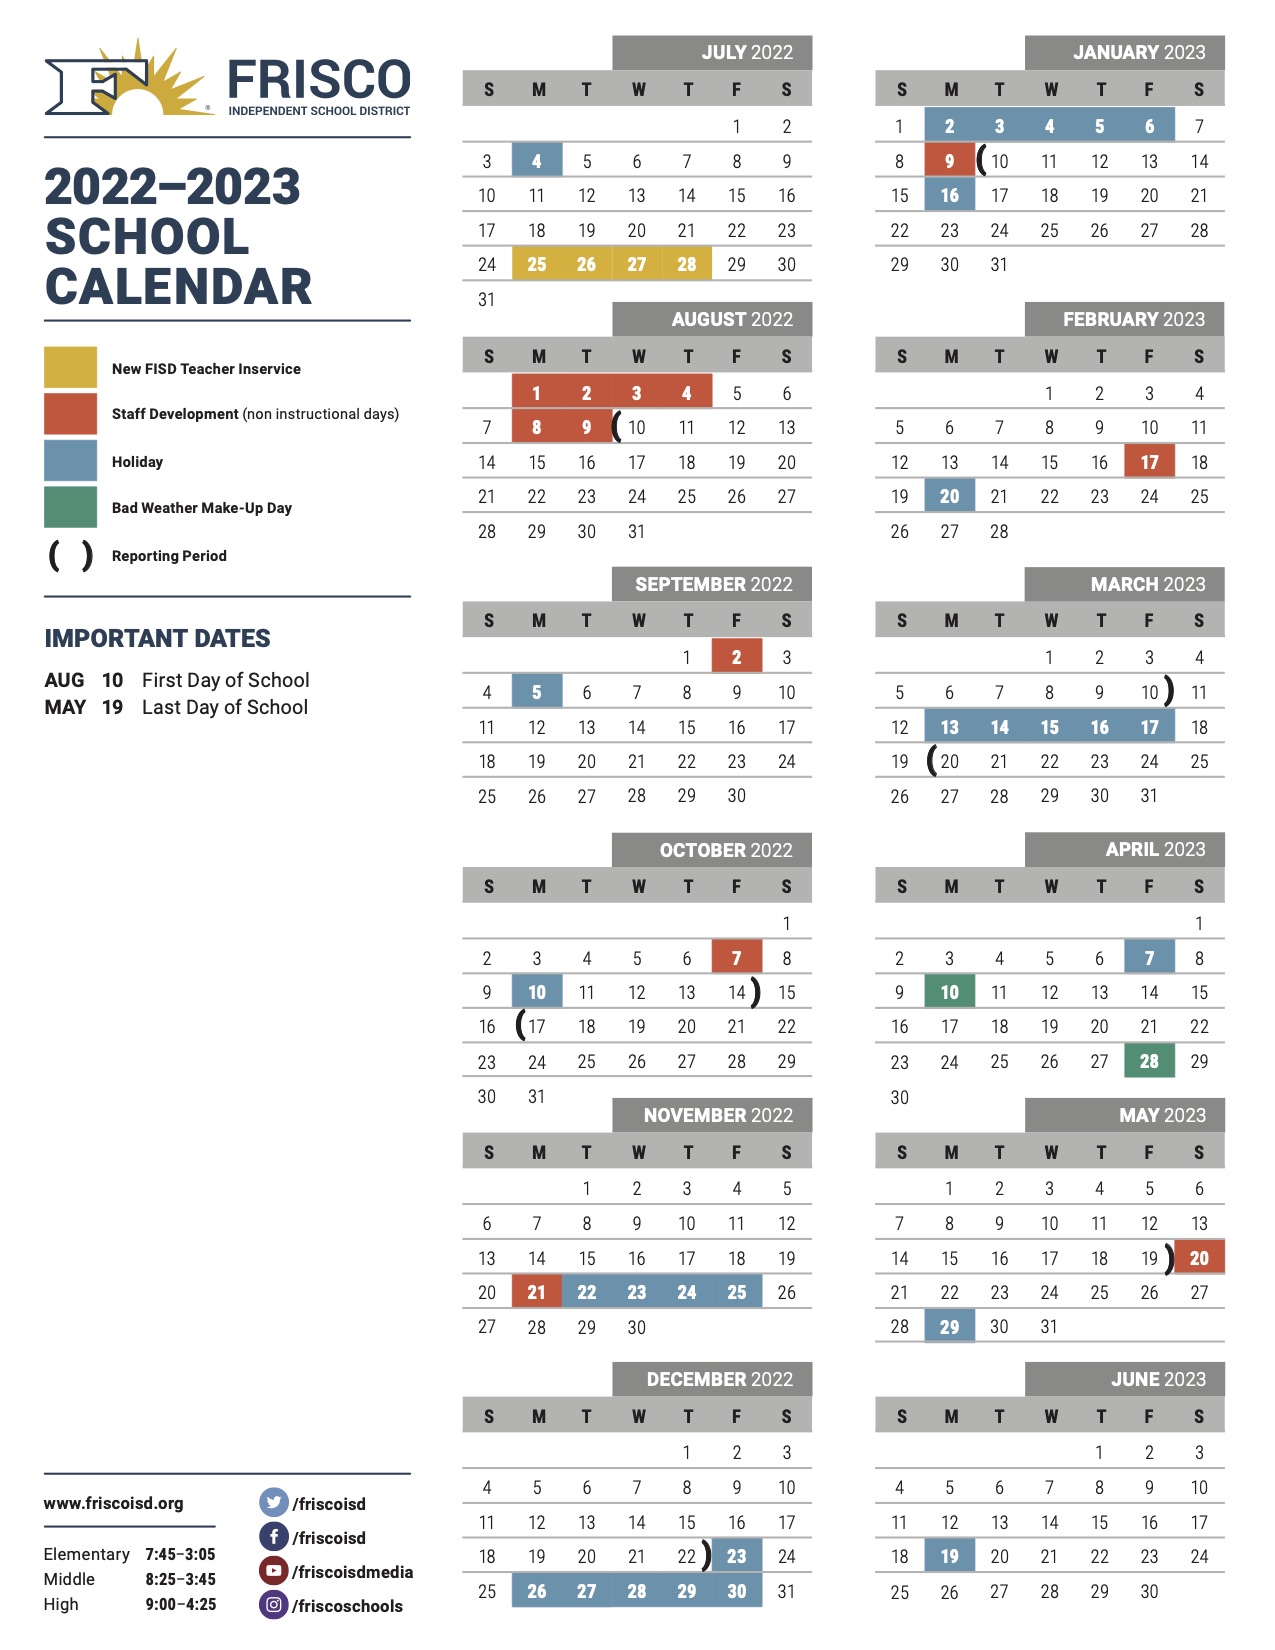 Fisd Calendar 2022 Frisco Isd On Twitter: "The Frisco Isd Academic Calendar Has Been Approved  For The 2022-23 School Year. Check Out Https://T.co/Jlvoekeccp For An  Overview Of The Calendar. Https://T.co/C8Gs8Lflru" / Twitter